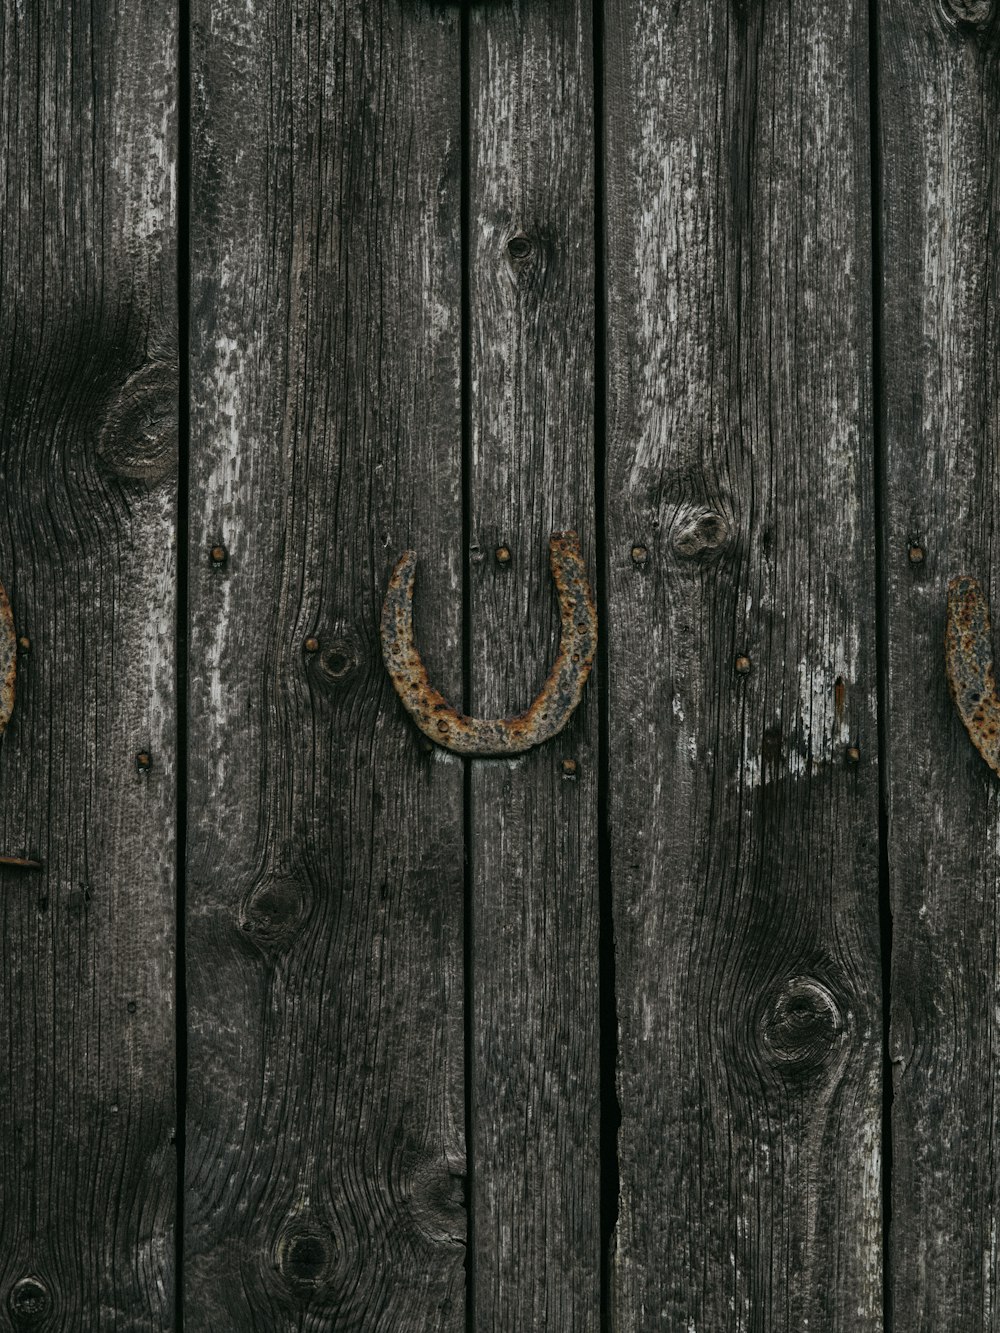 a close up of a wooden fence with two horseshoes